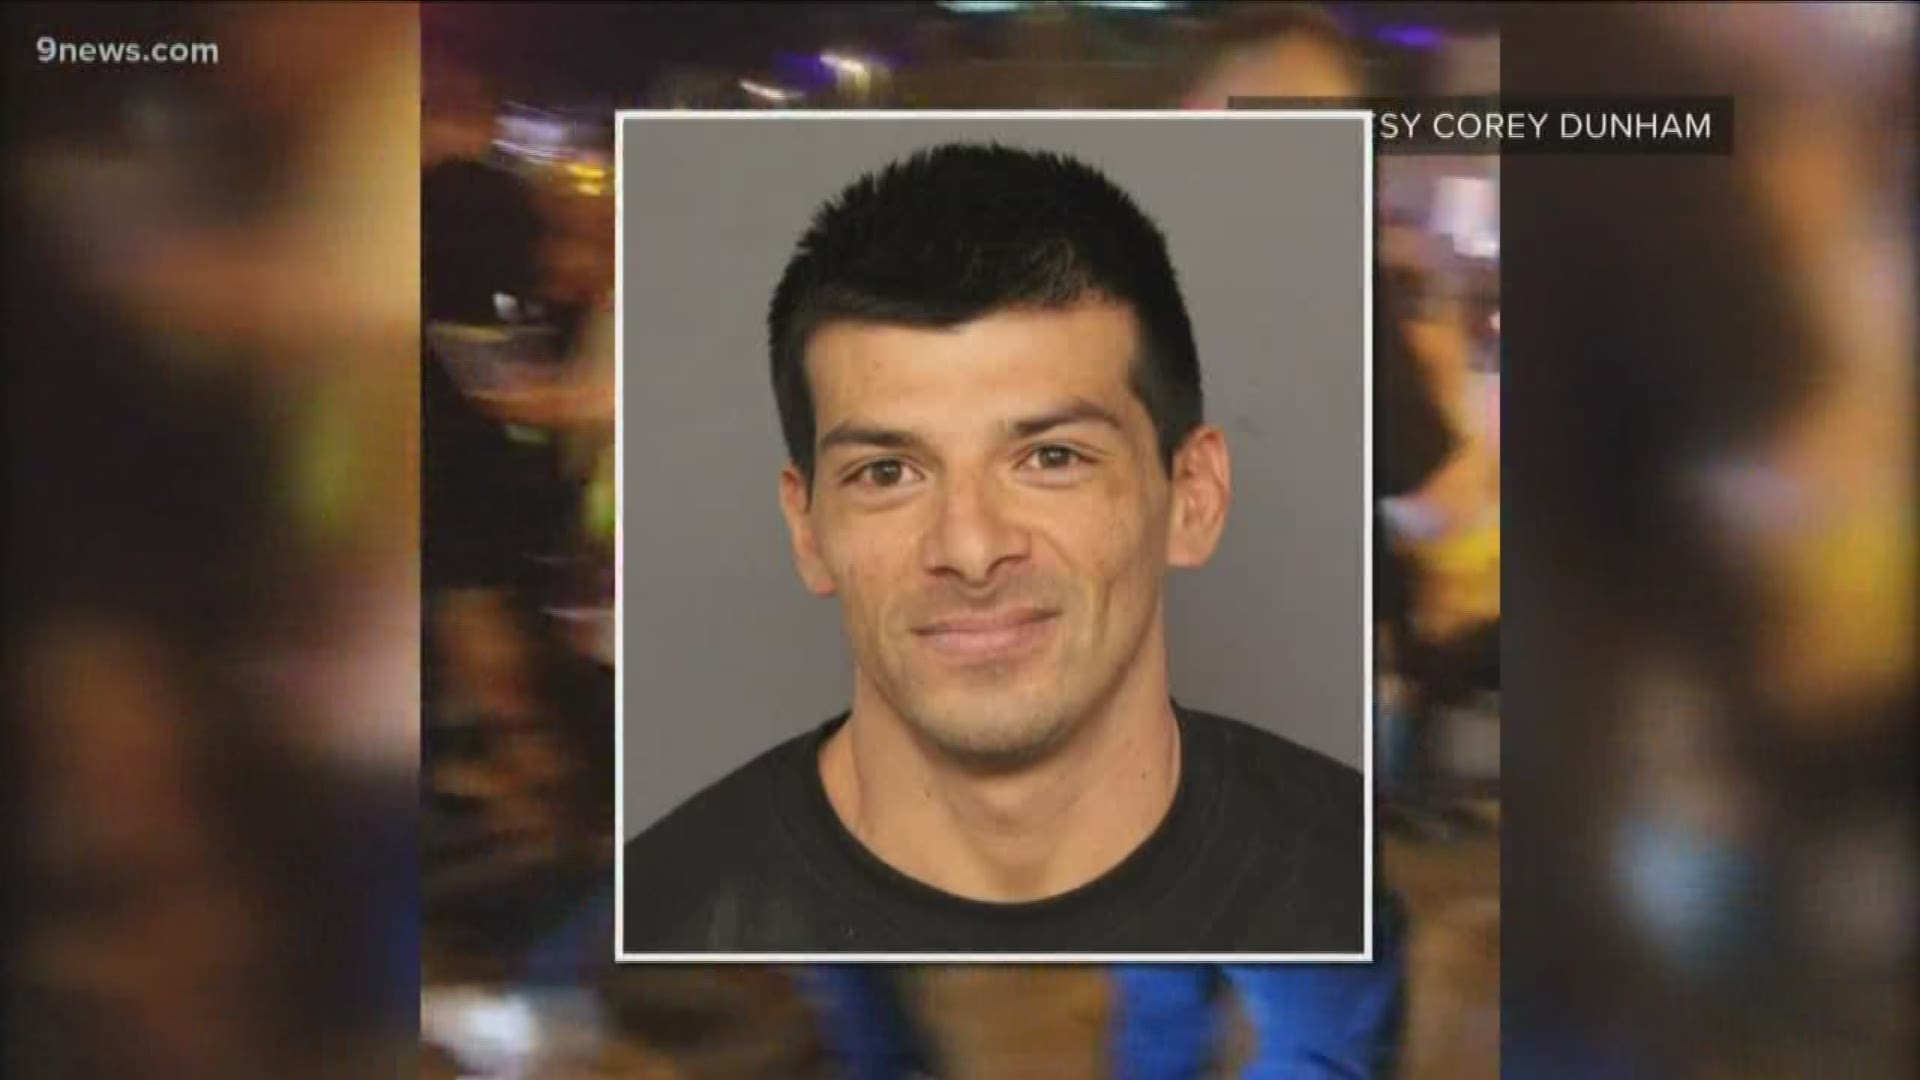 Video shows Manuel Saucedo, 34, driving his car into a busy LoDo intersection and hitting two people, according to an affidavit.